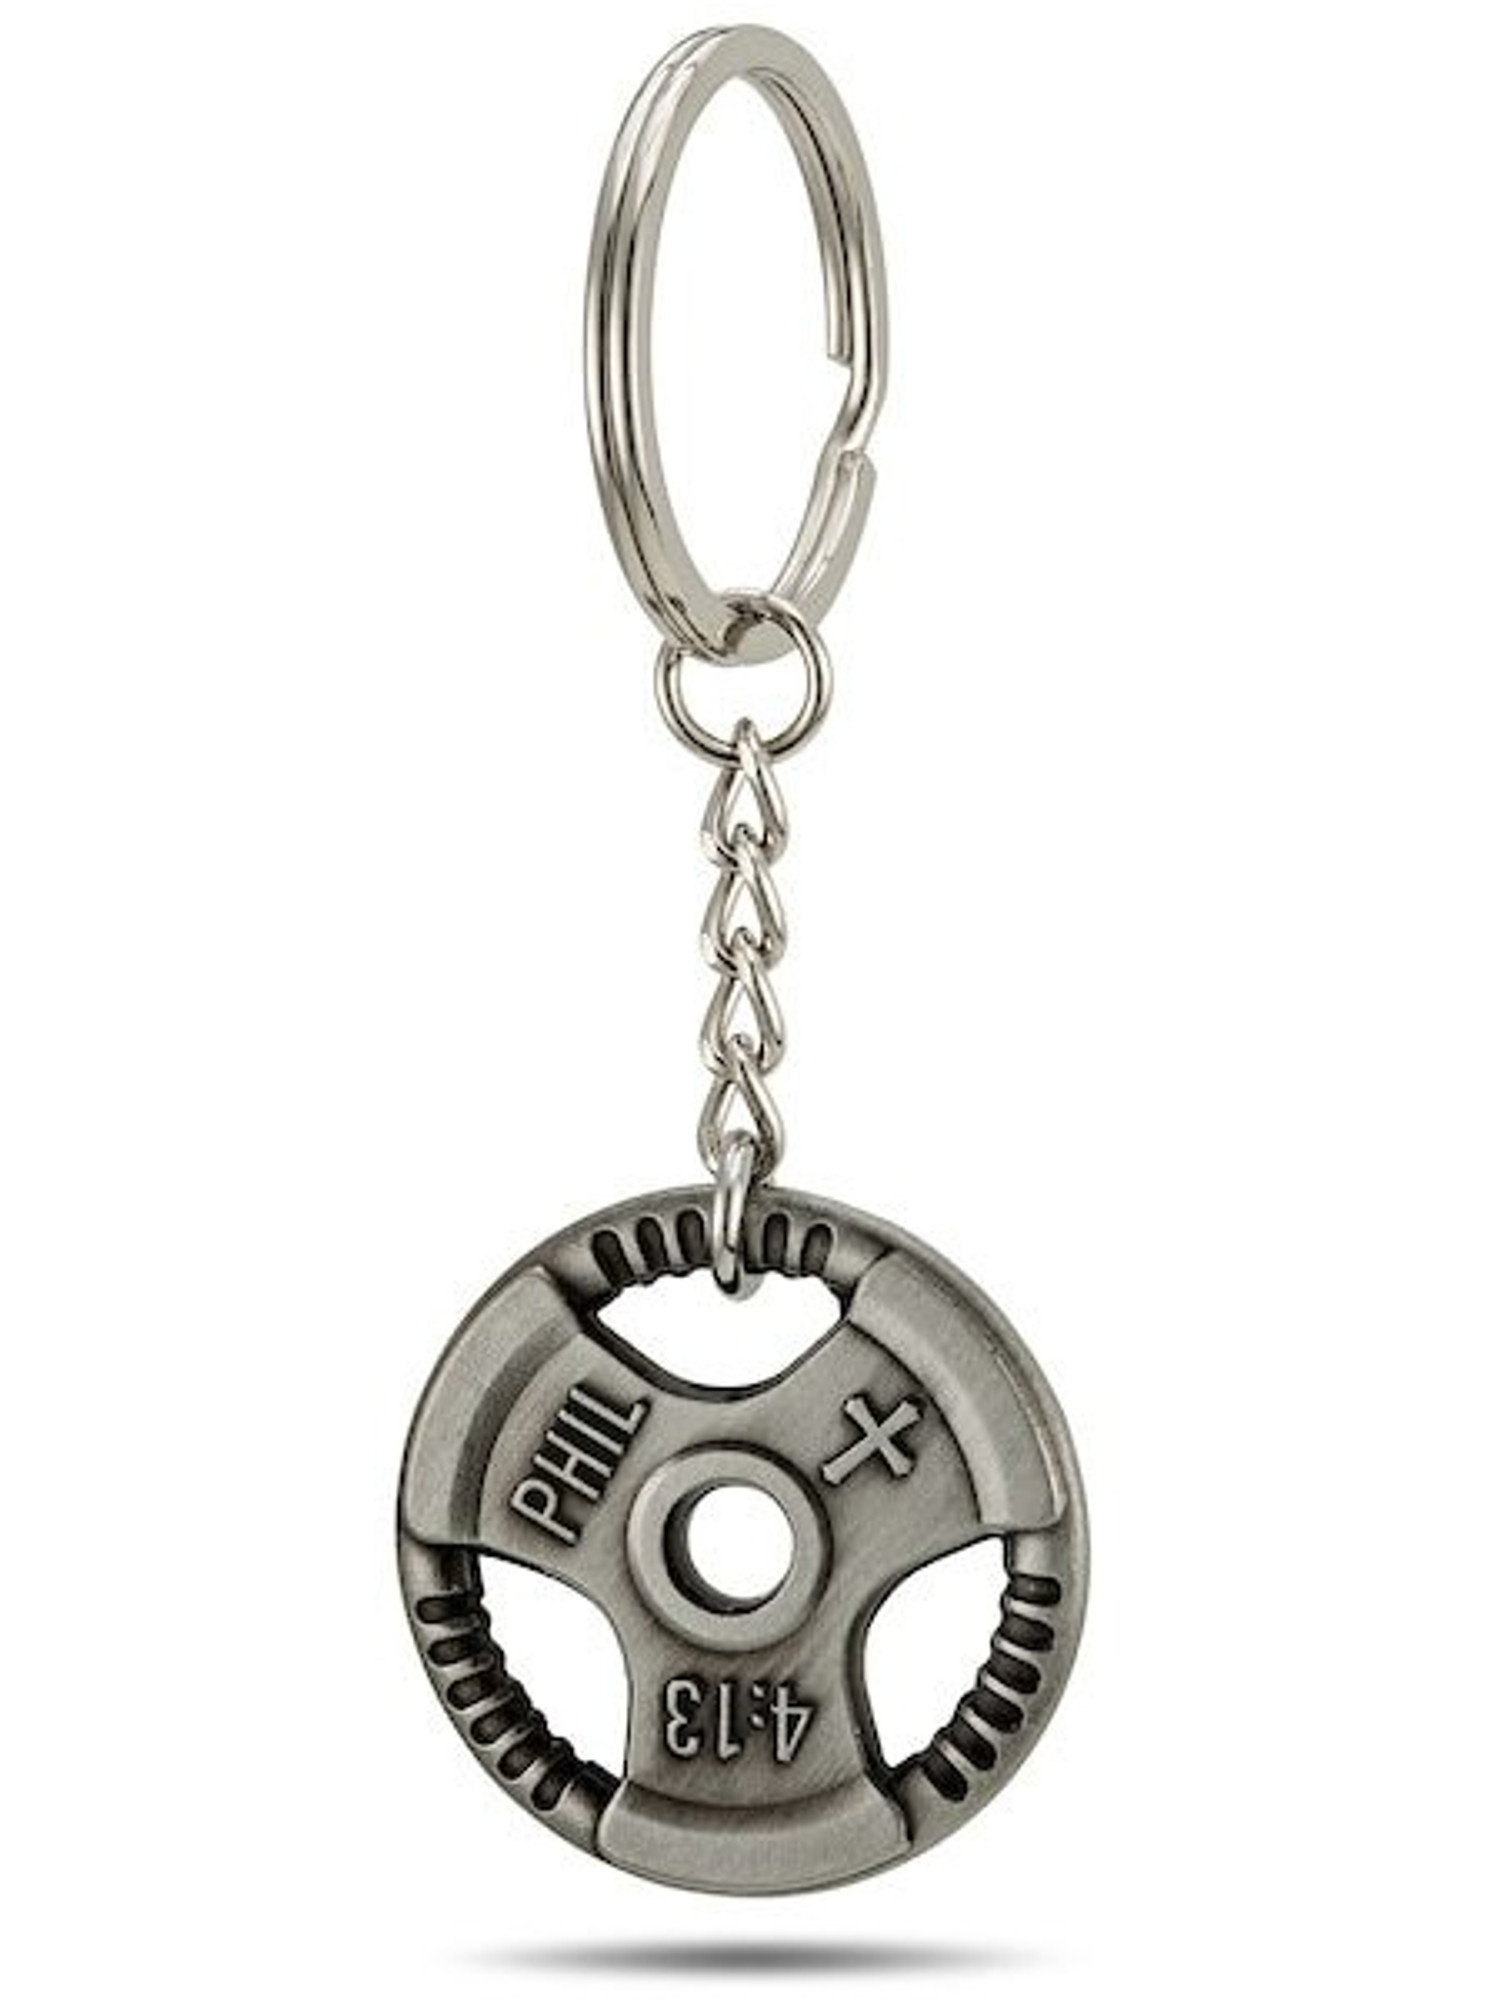 Stainless Steel Keychain Rings – CREST Products